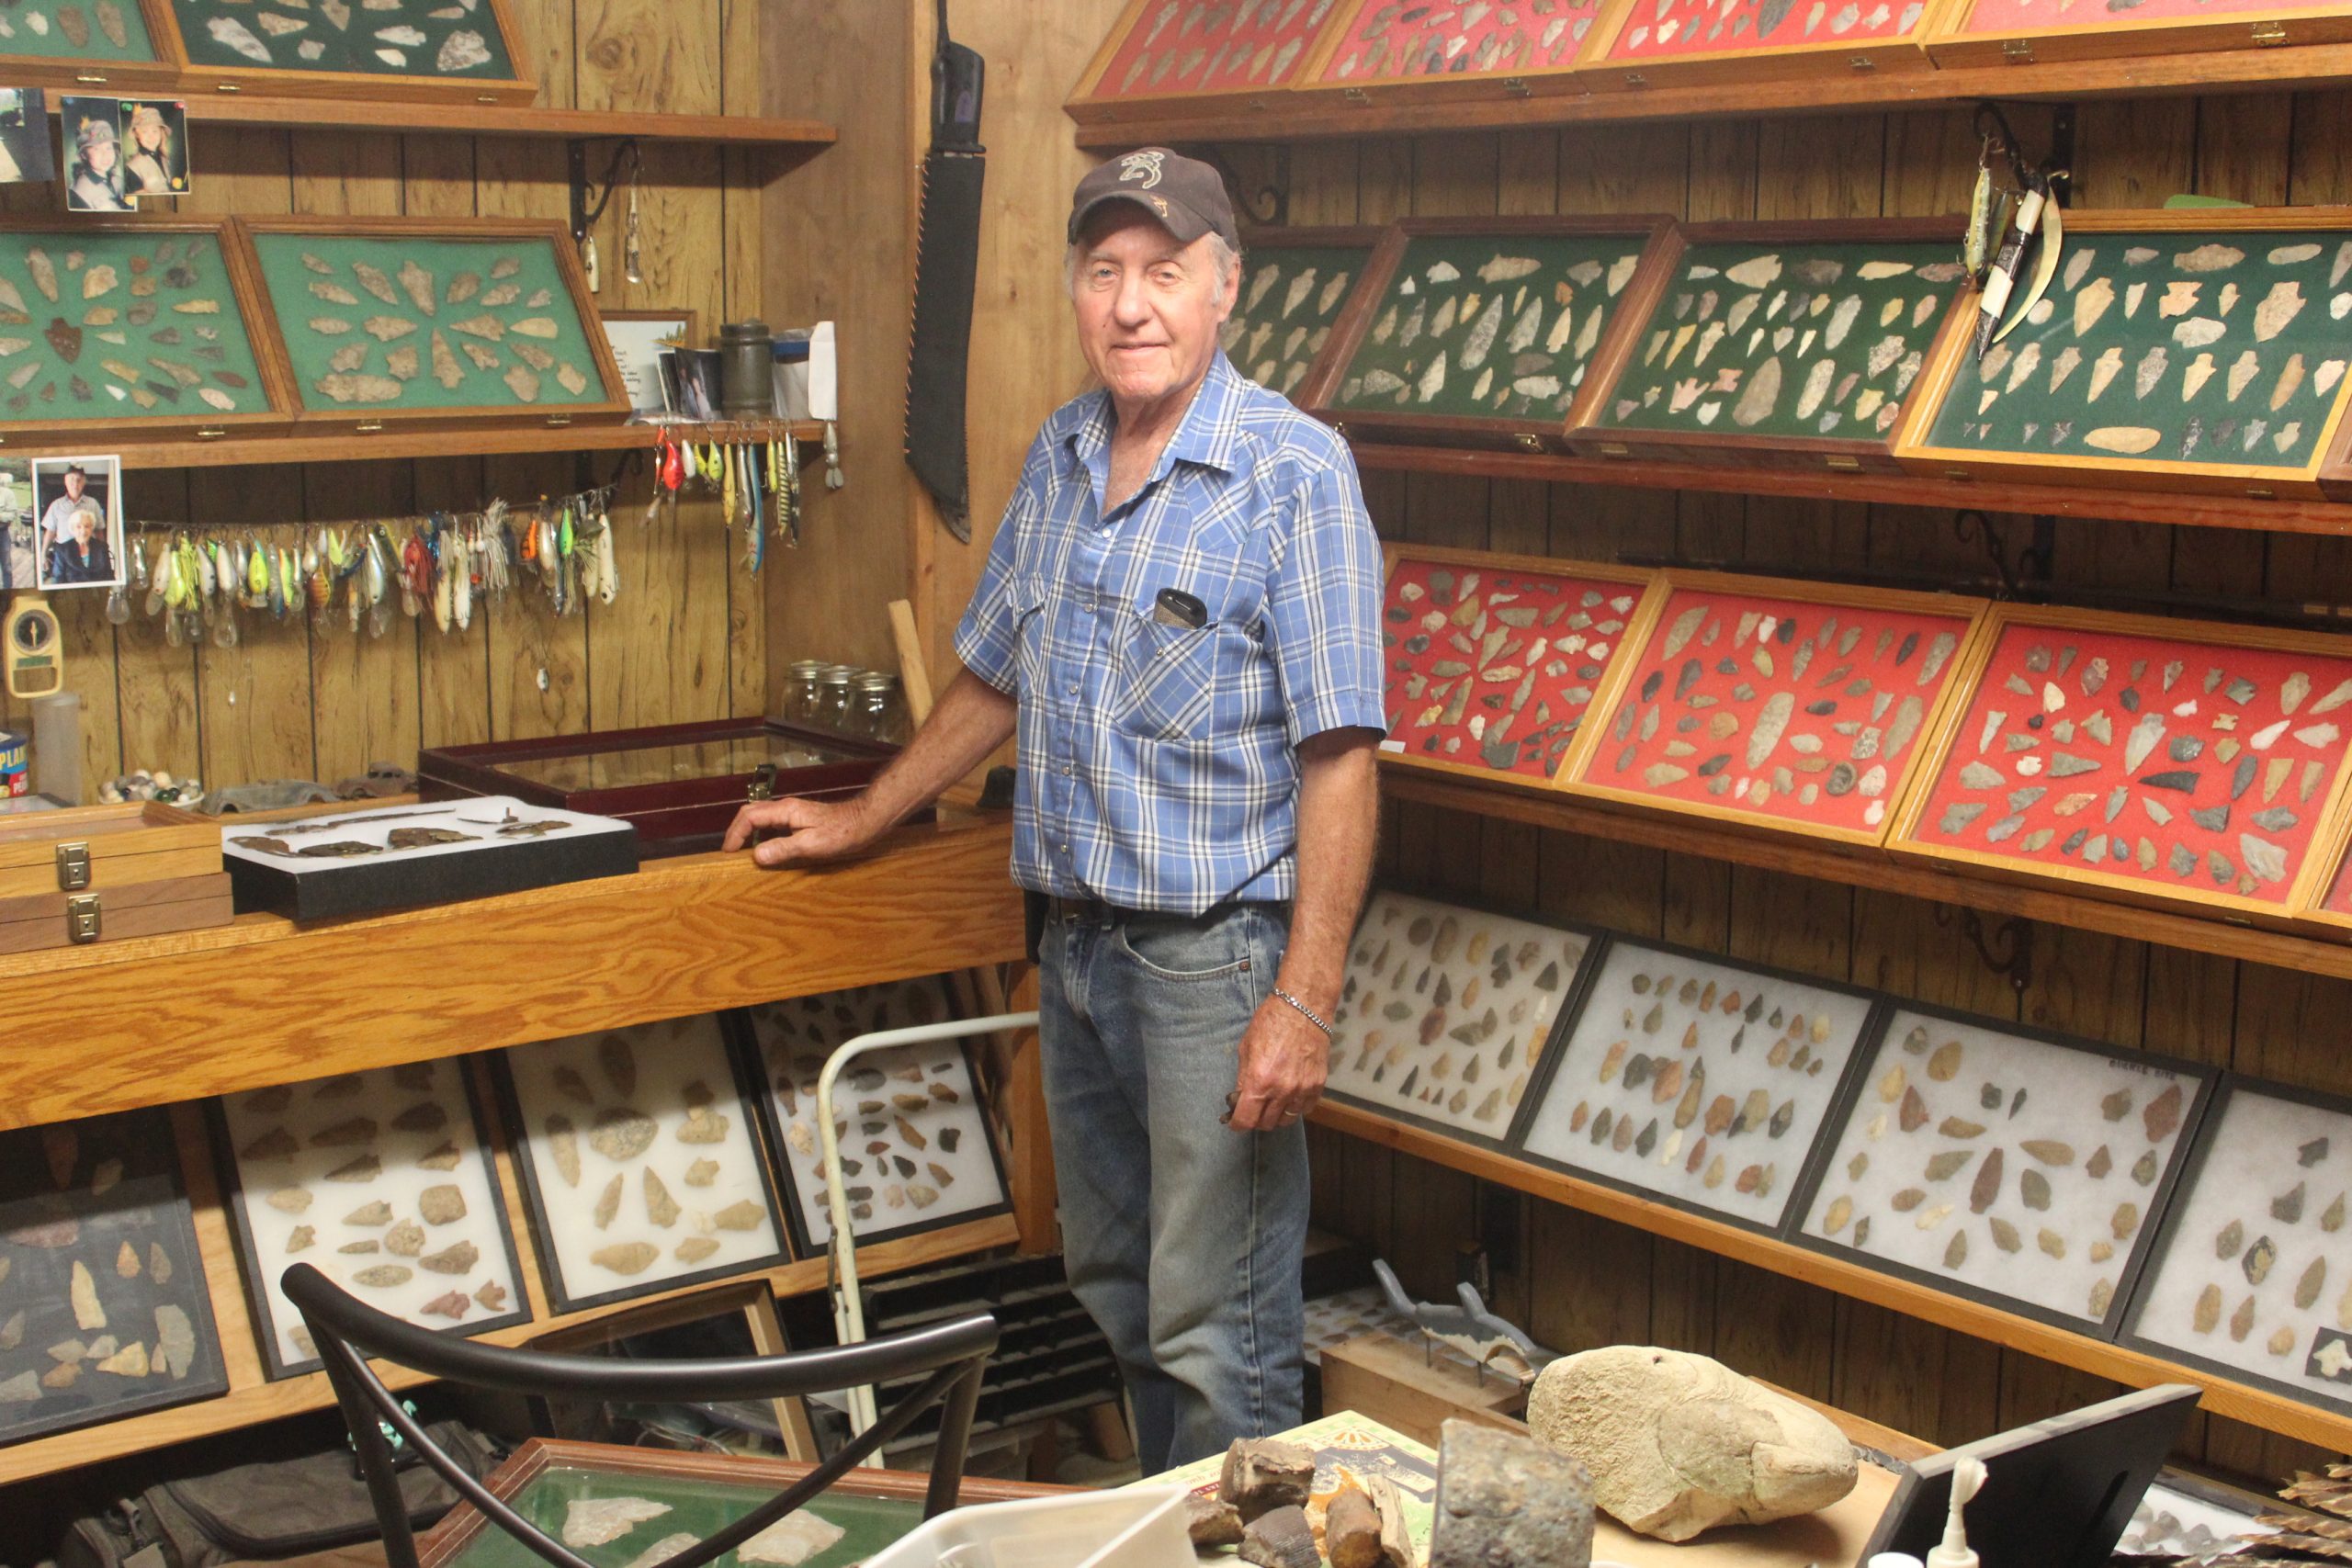 Trussville collector shares his mini museum of buried treasure